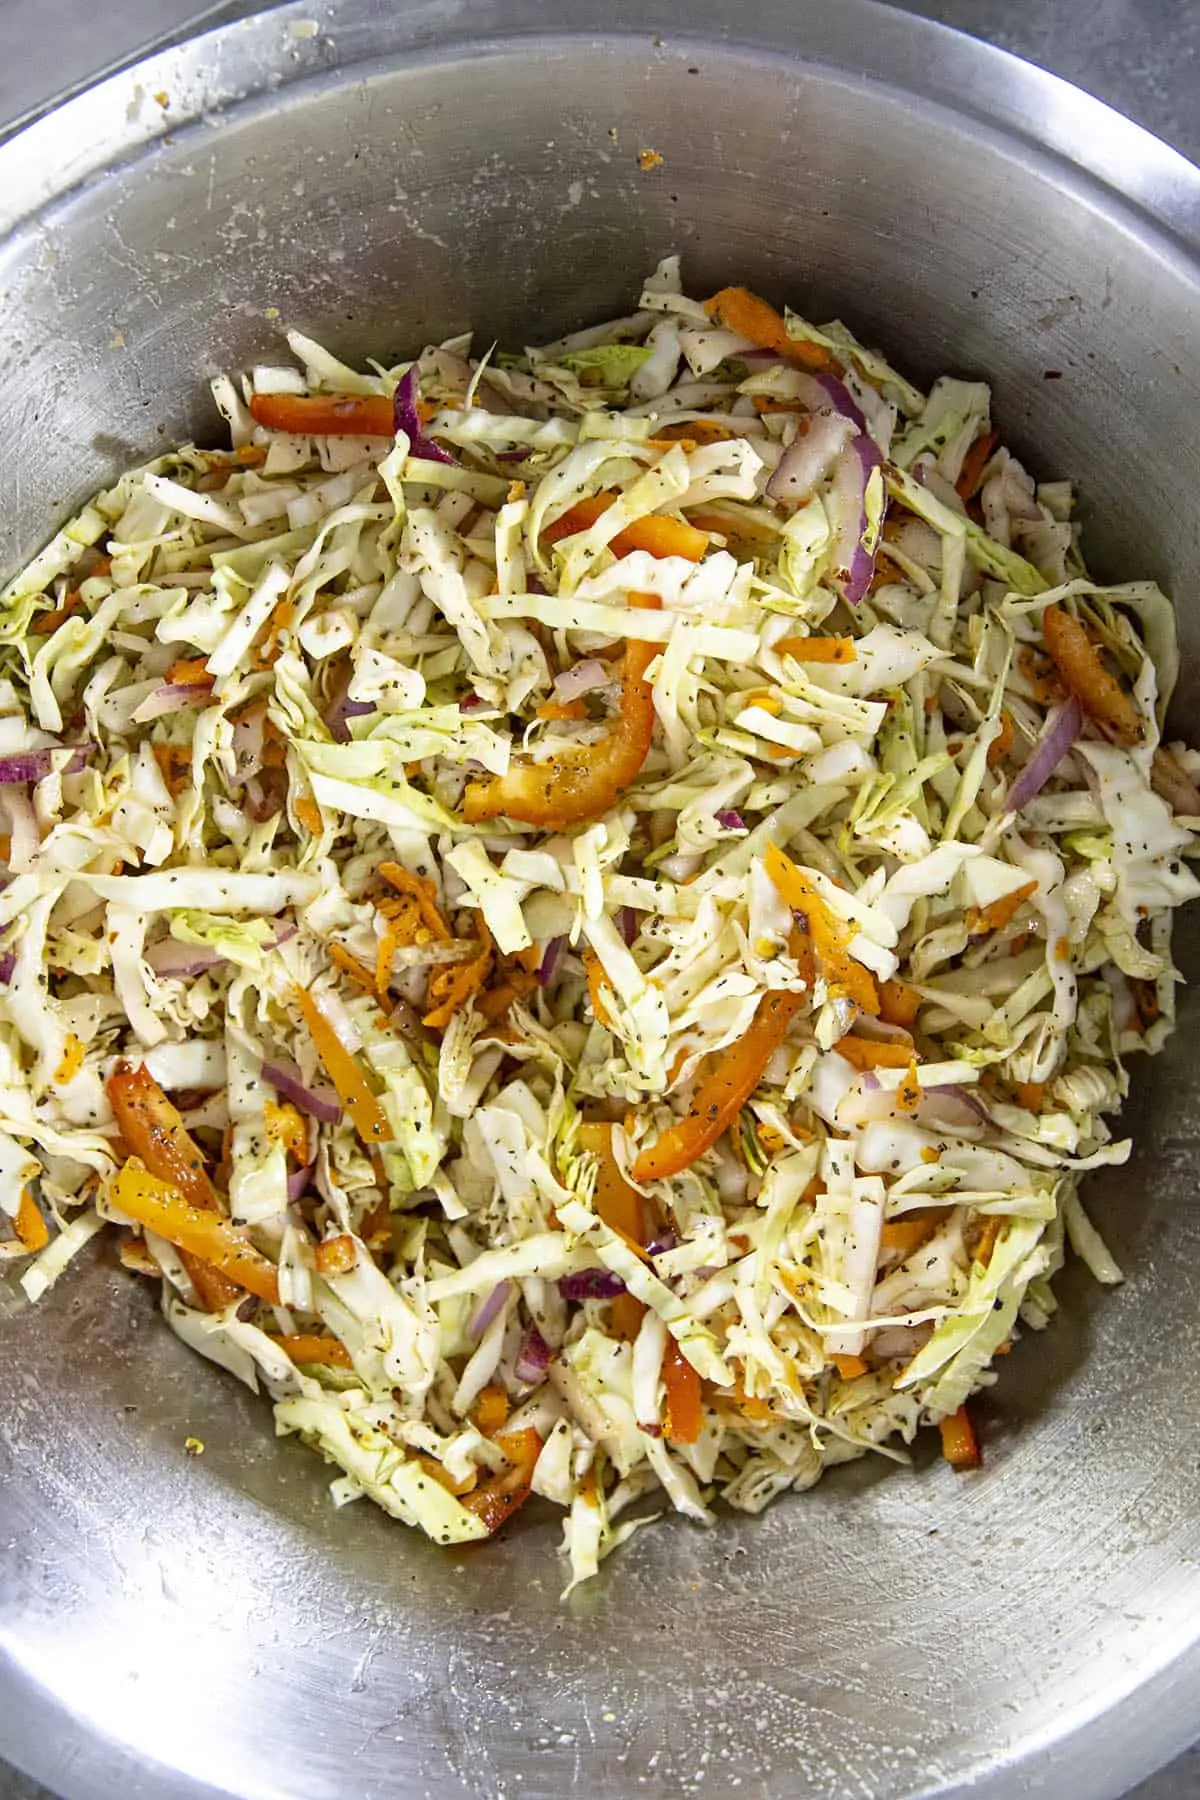 Tossing the Vinegar Coleslaw ingredients with the vinaigrette in a bowl